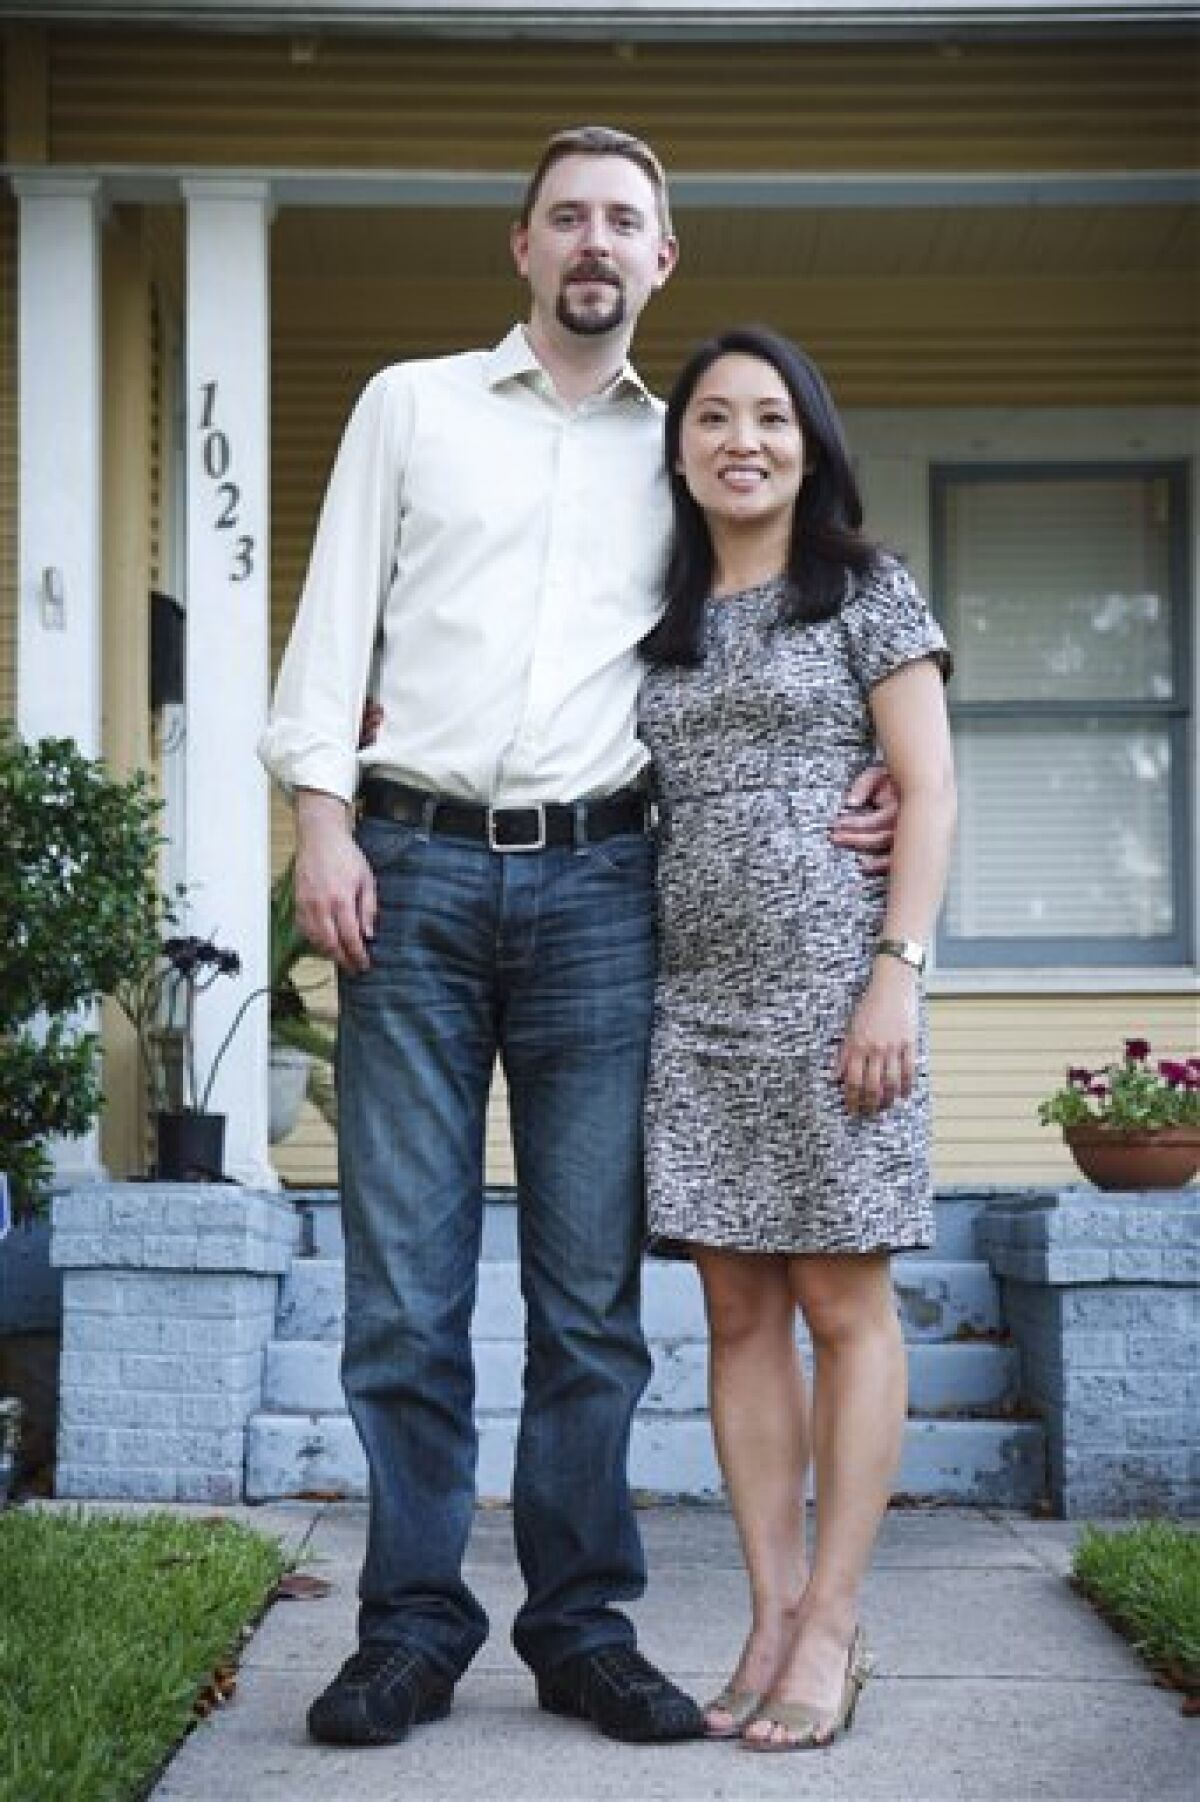 Is US a melting pot? Interracial marriage slows - The San Diego  Union-Tribune